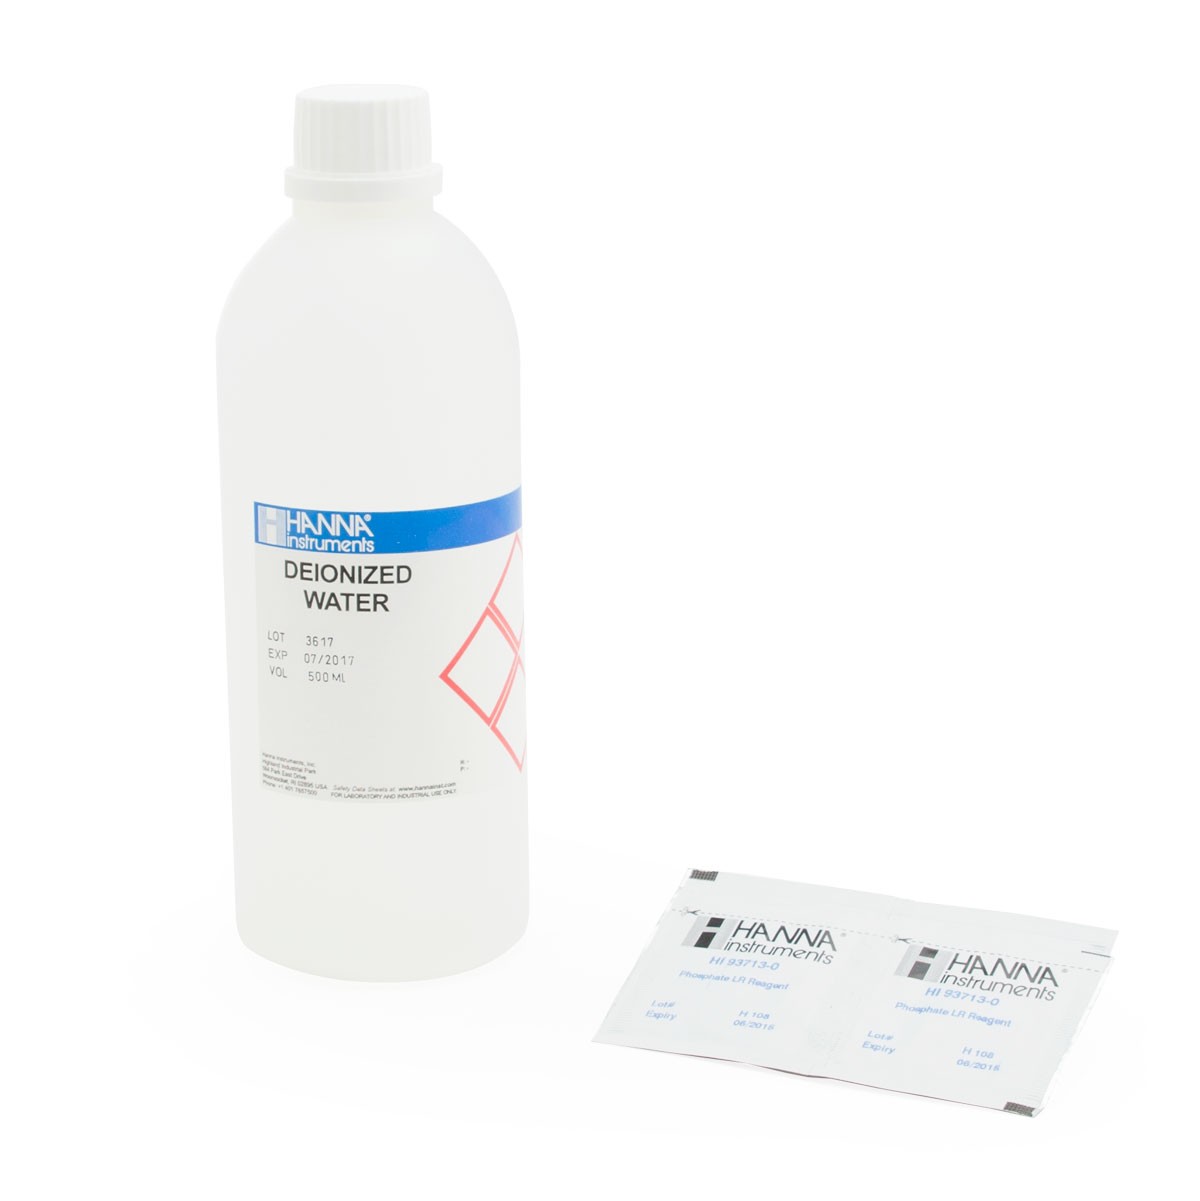 Phosphate Test Kit Replacement Reagents (100 tests) - HI38061-100